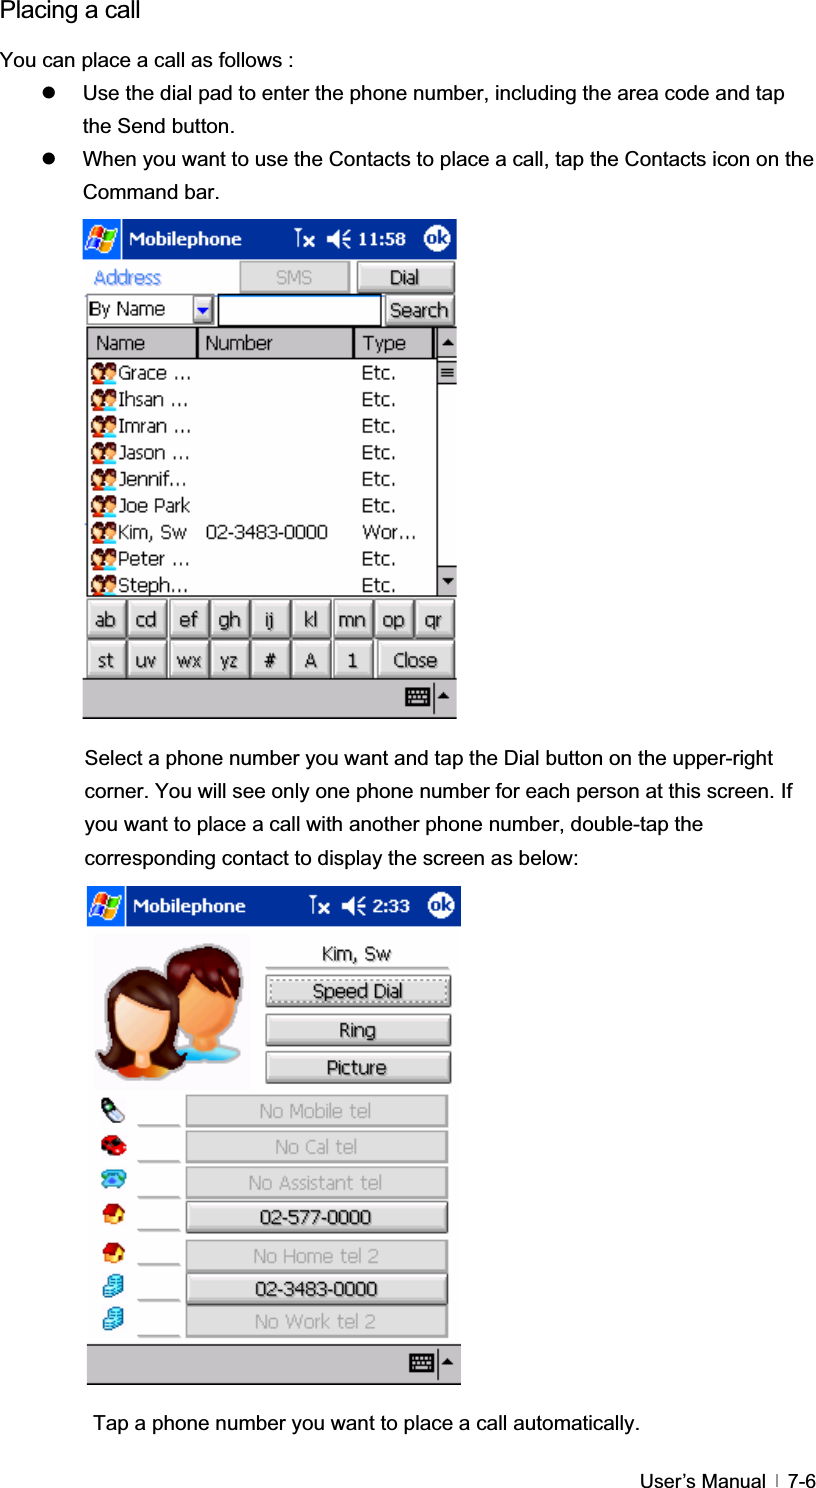 GUser’s Manual   7-6Placing a call You can place a call as follows : z  Use the dial pad to enter the phone number, including the area code and tap the Send button. z  When you want to use the Contacts to place a call, tap the Contacts icon on the Command bar. Select a phone number you want and tap the Dial button on the upper-right corner. You will see only one phone number for each person at this screen. If you want to place a call with another phone number, double-tap the corresponding contact to display the screen as below: Tap a phone number you want to place a call automatically. 